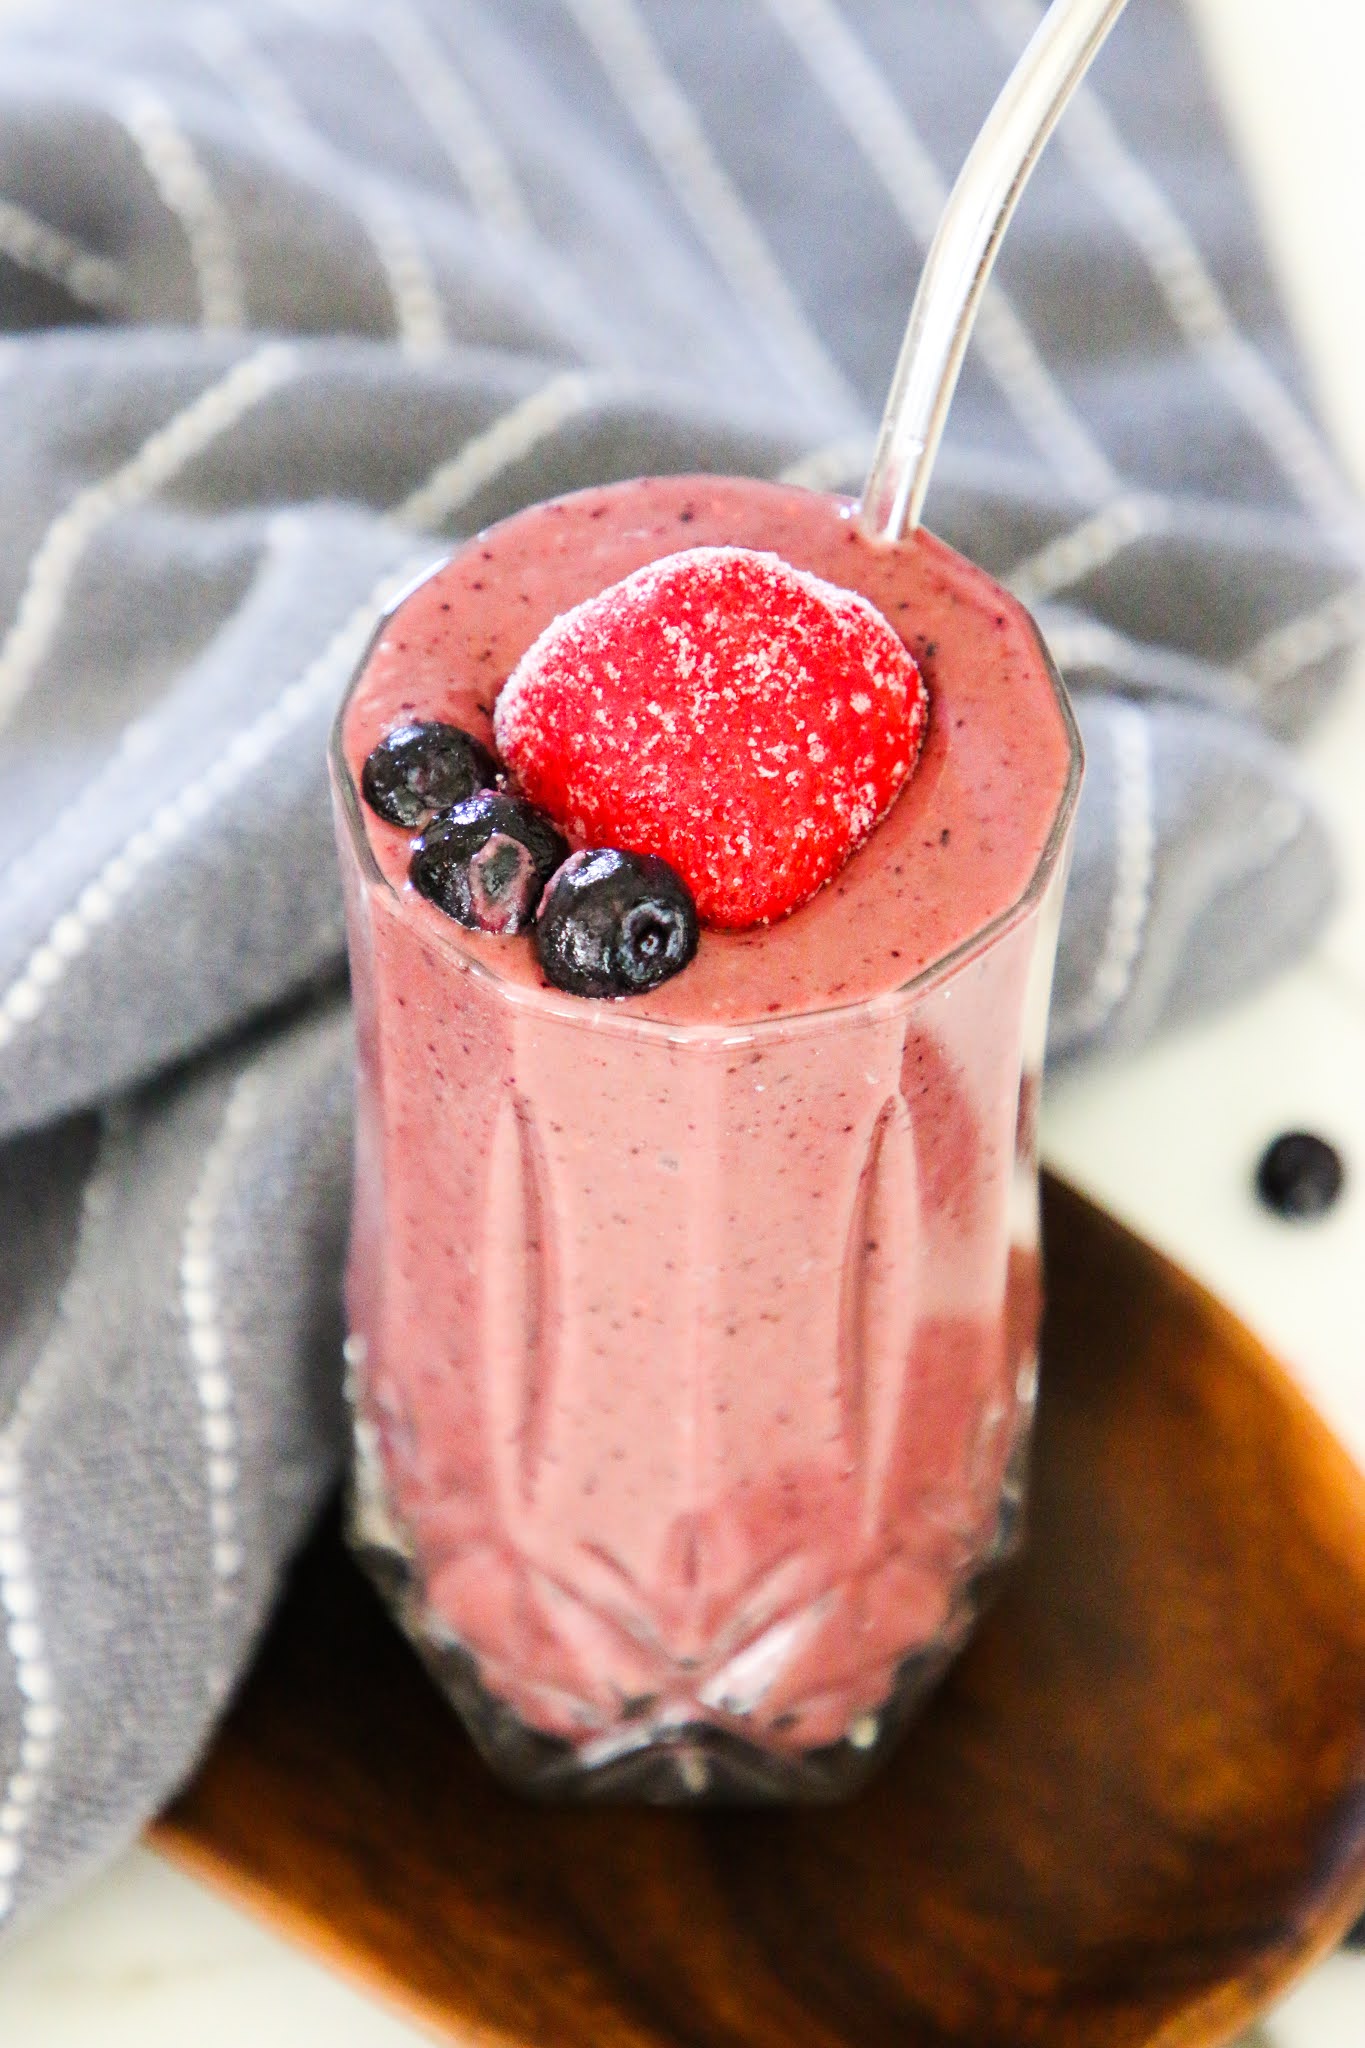 Smoothie with a big strawberry on top, sitting on a wooden platter, with a dish towel in the background.